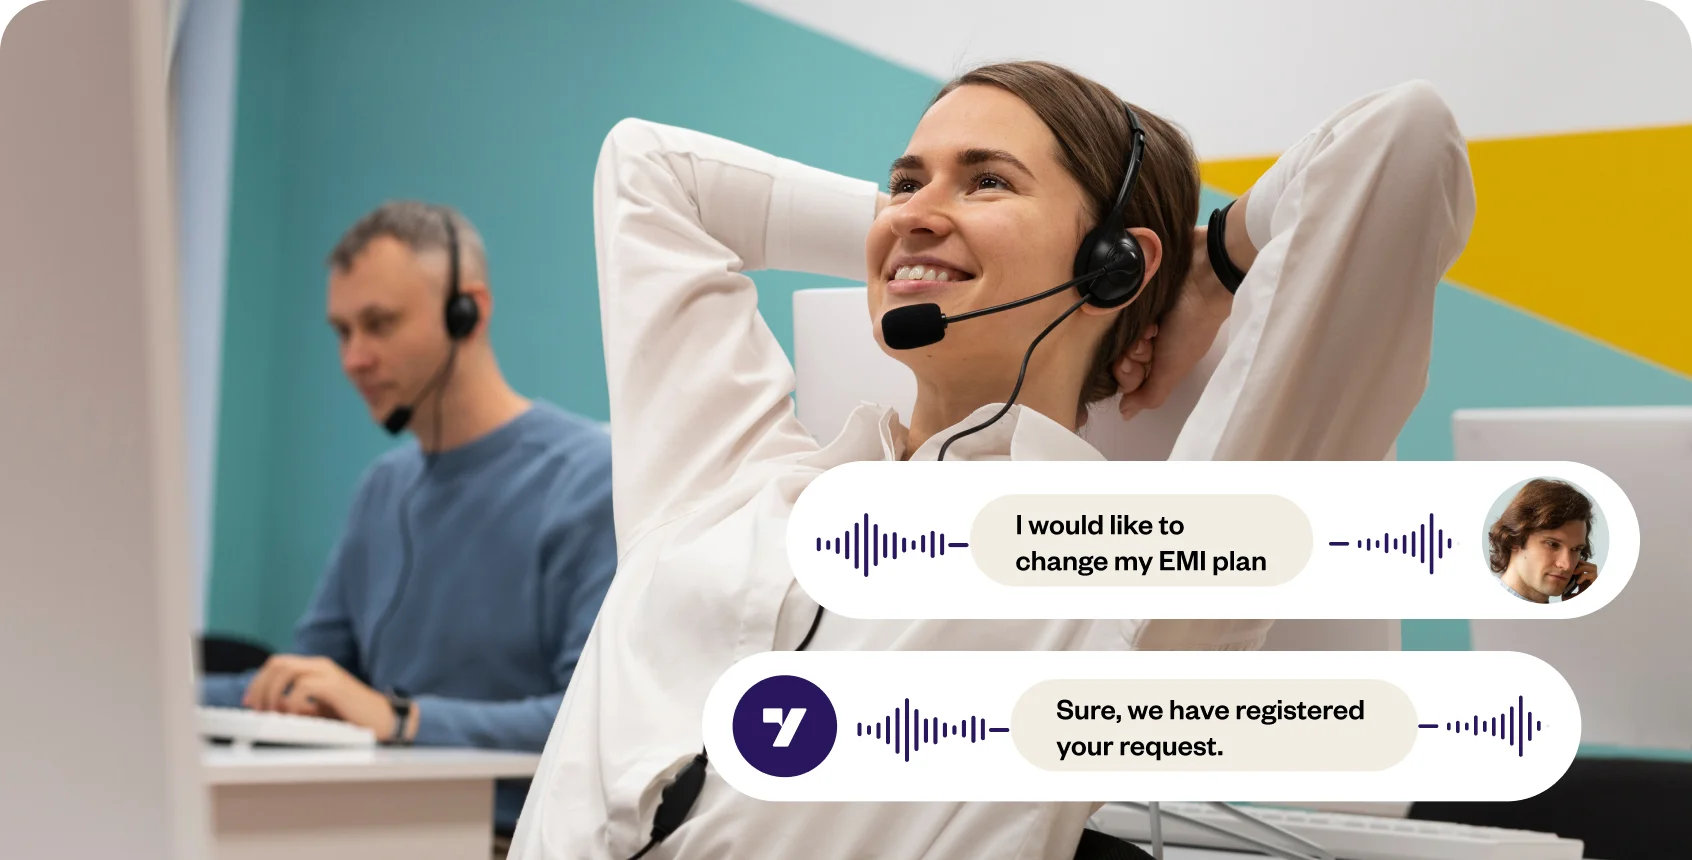 What are the benefits of contact center AI?